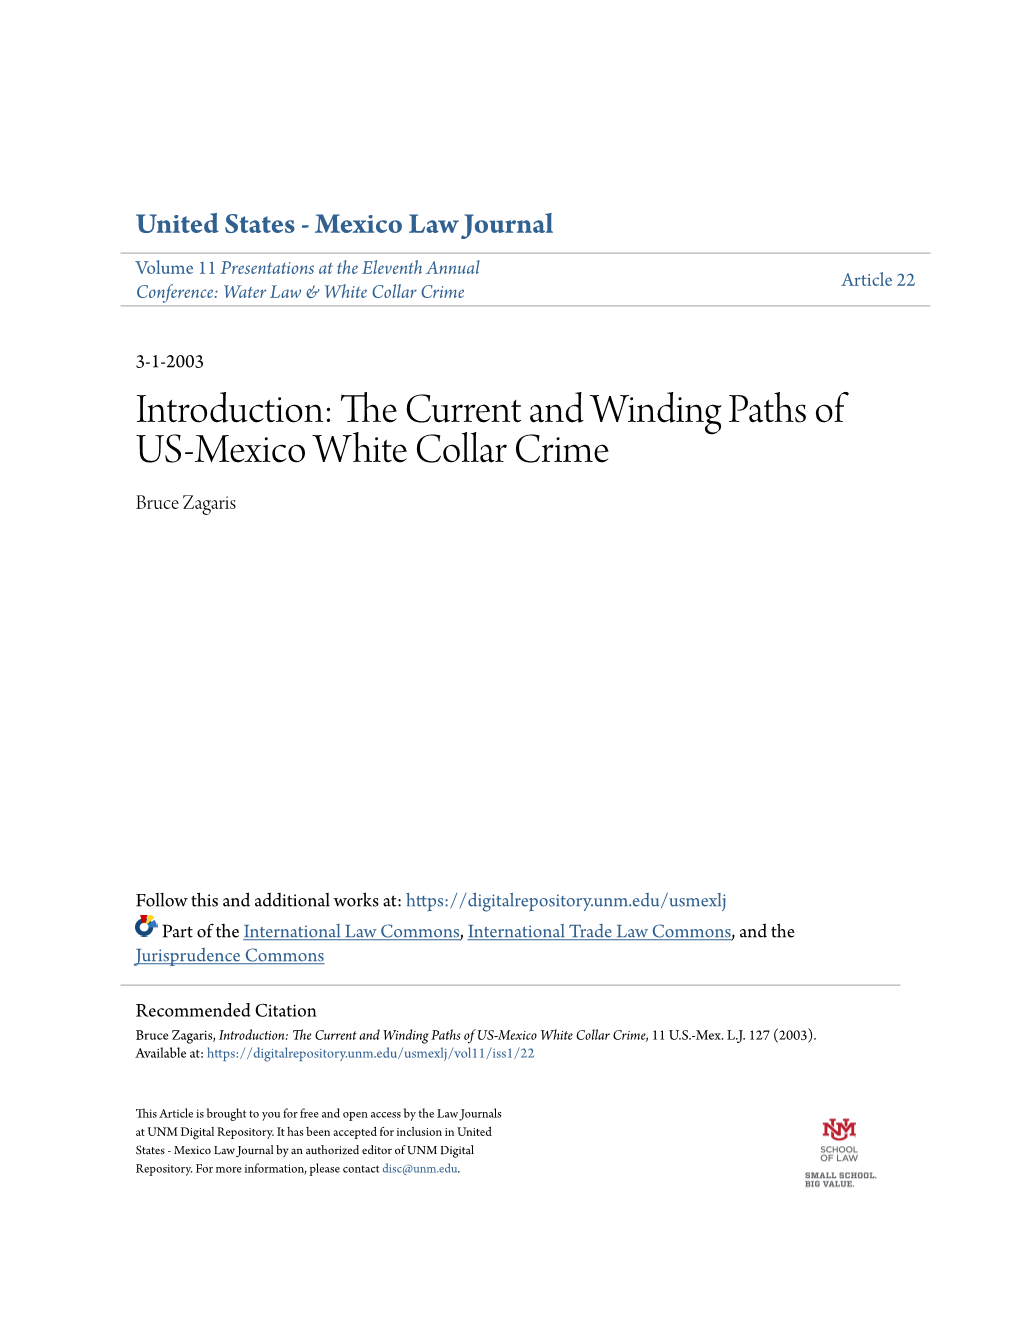 The Current and Winding Paths of US-Mexico White Collar Crime, 11 U.S.-Mex